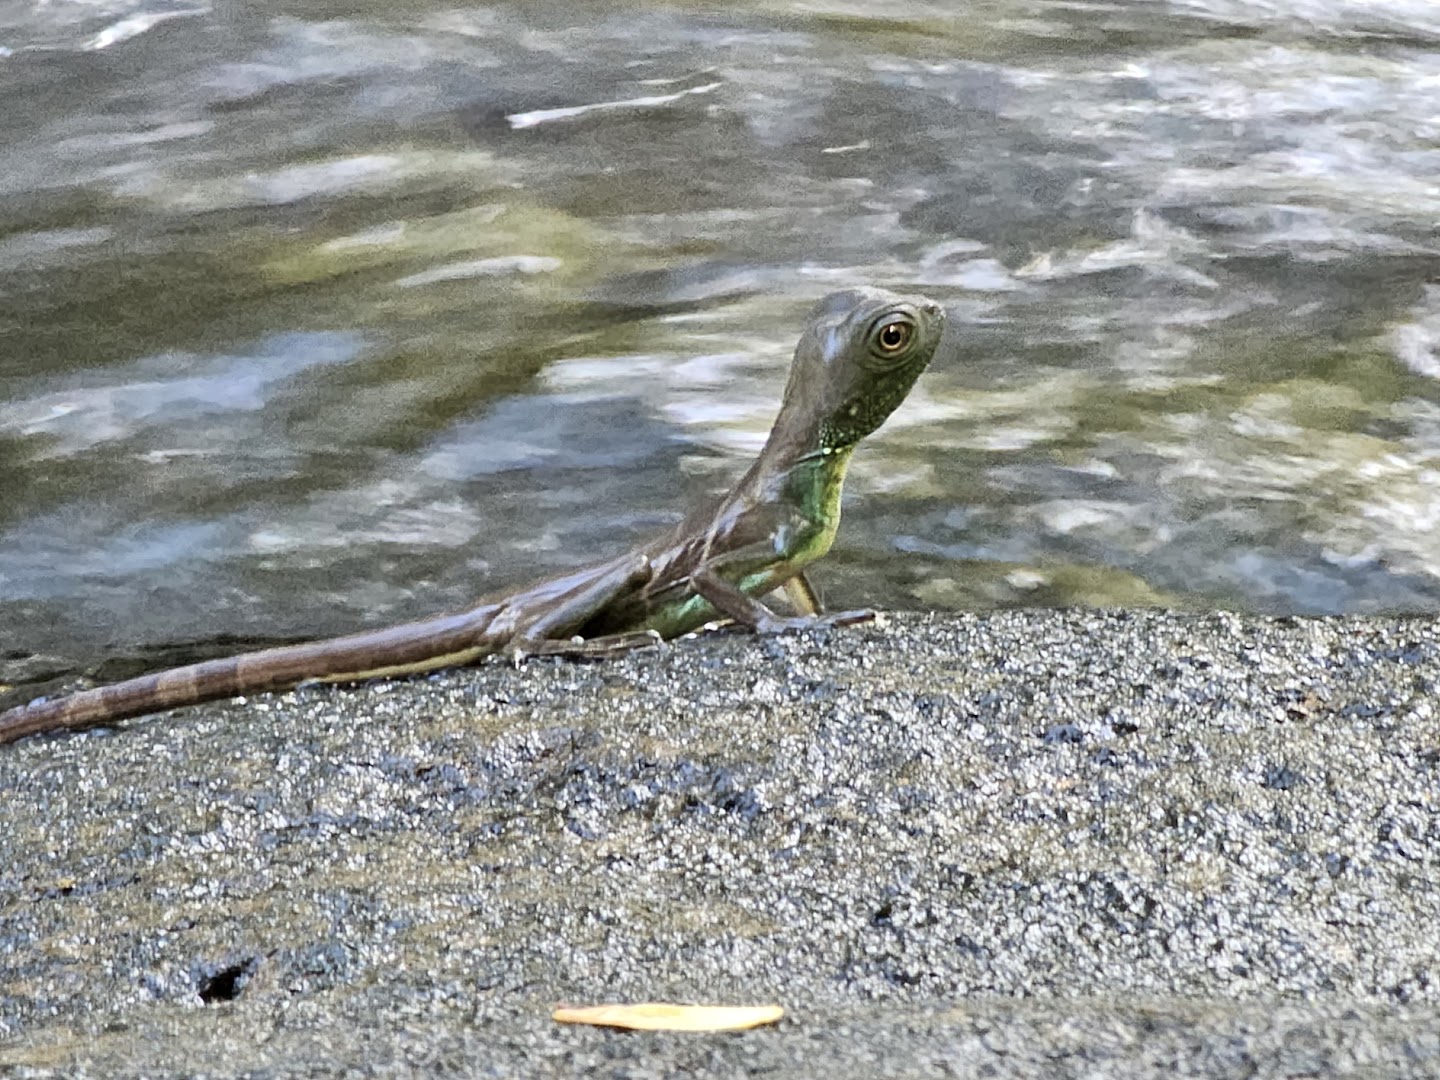 A Water Dragon juvenile in the wet season